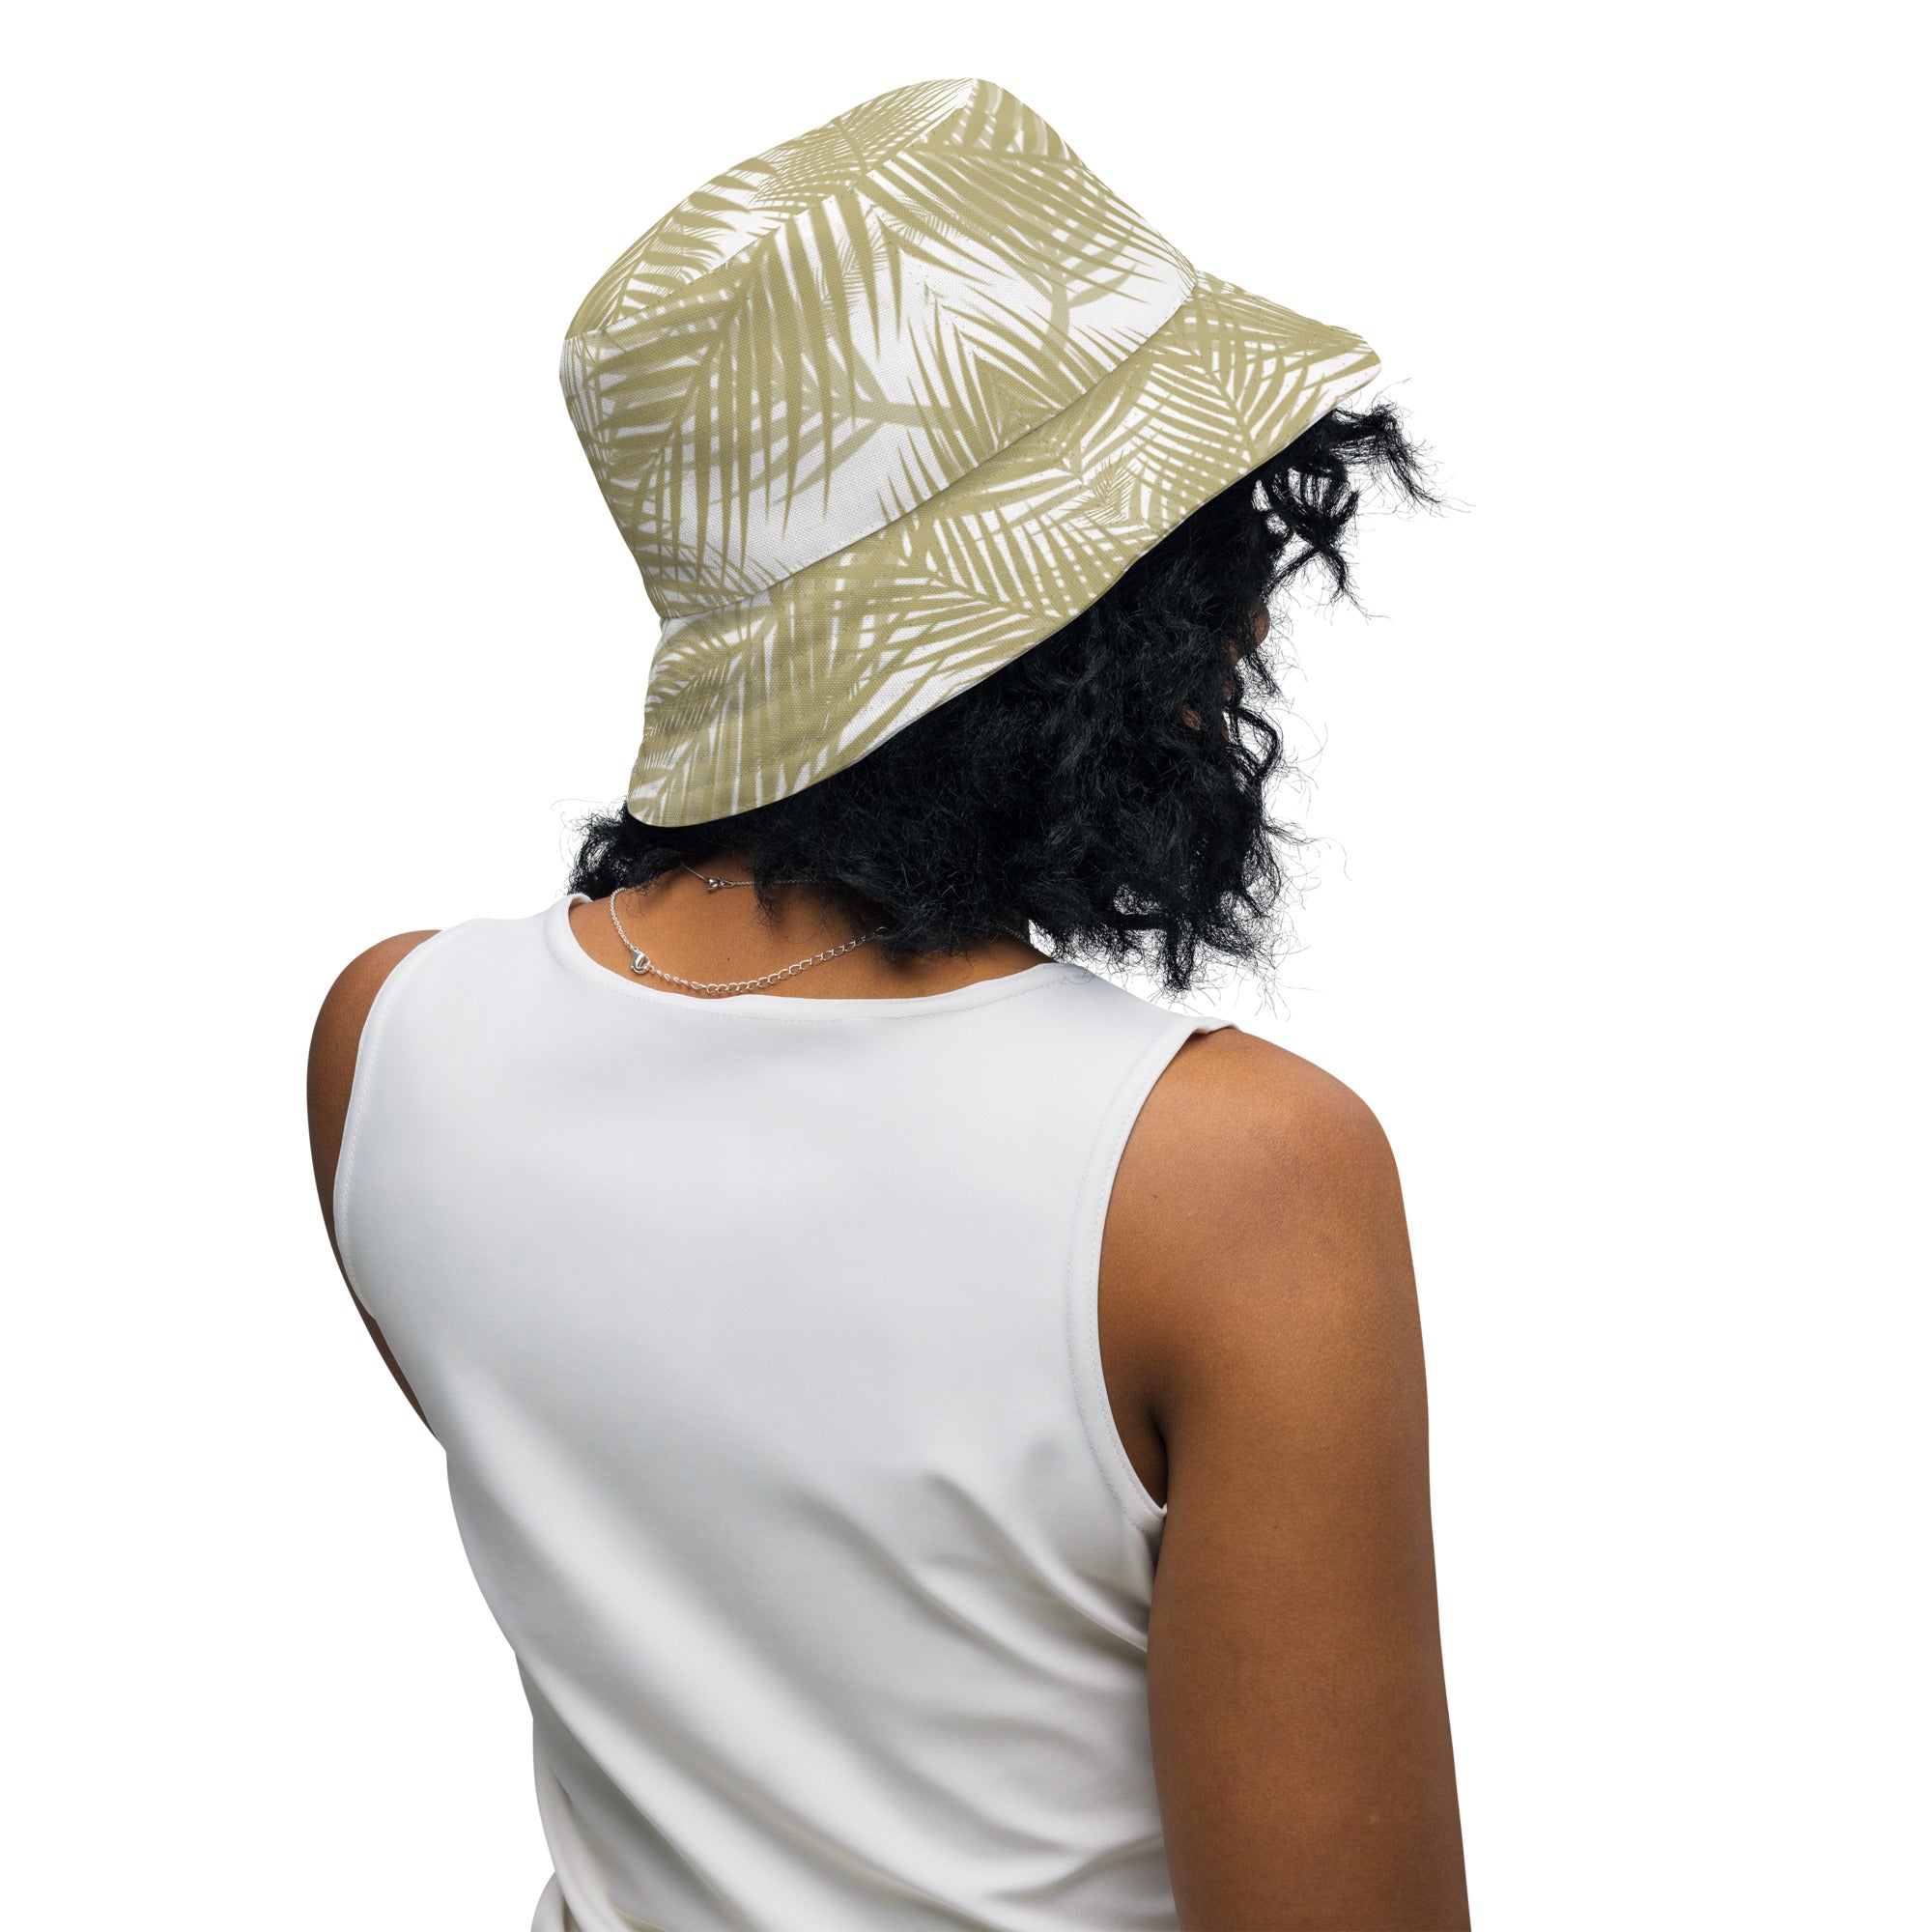 "Golden Palms: Bucket Hat with a Touch of Luxury", lioness-love